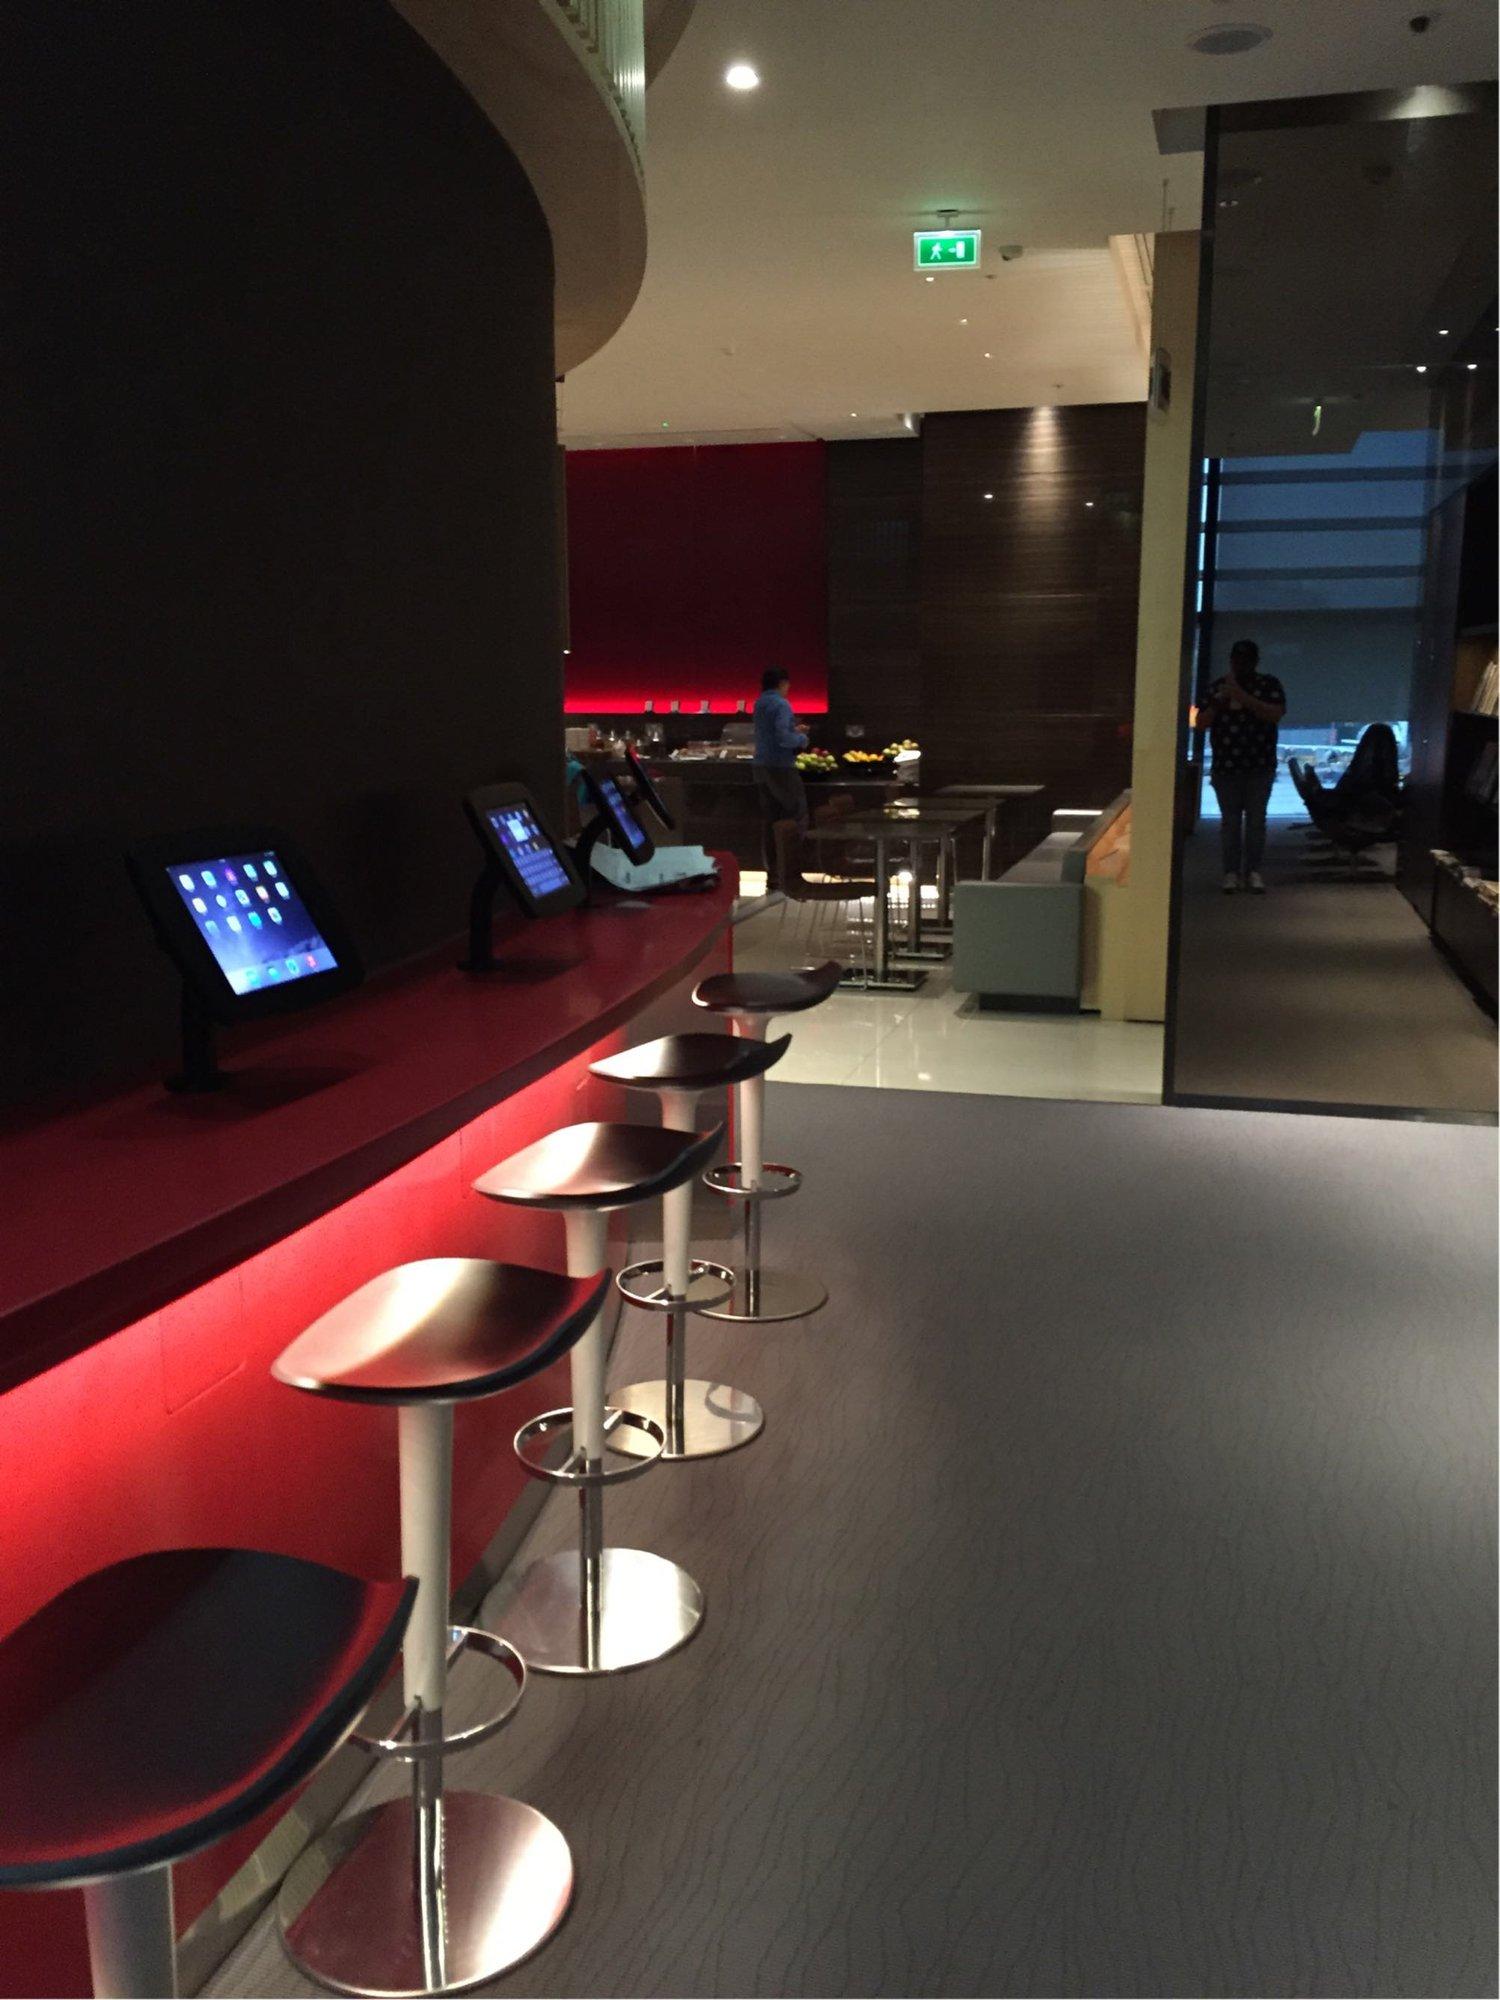 Air Canada Maple Leaf Lounge image 25 of 27